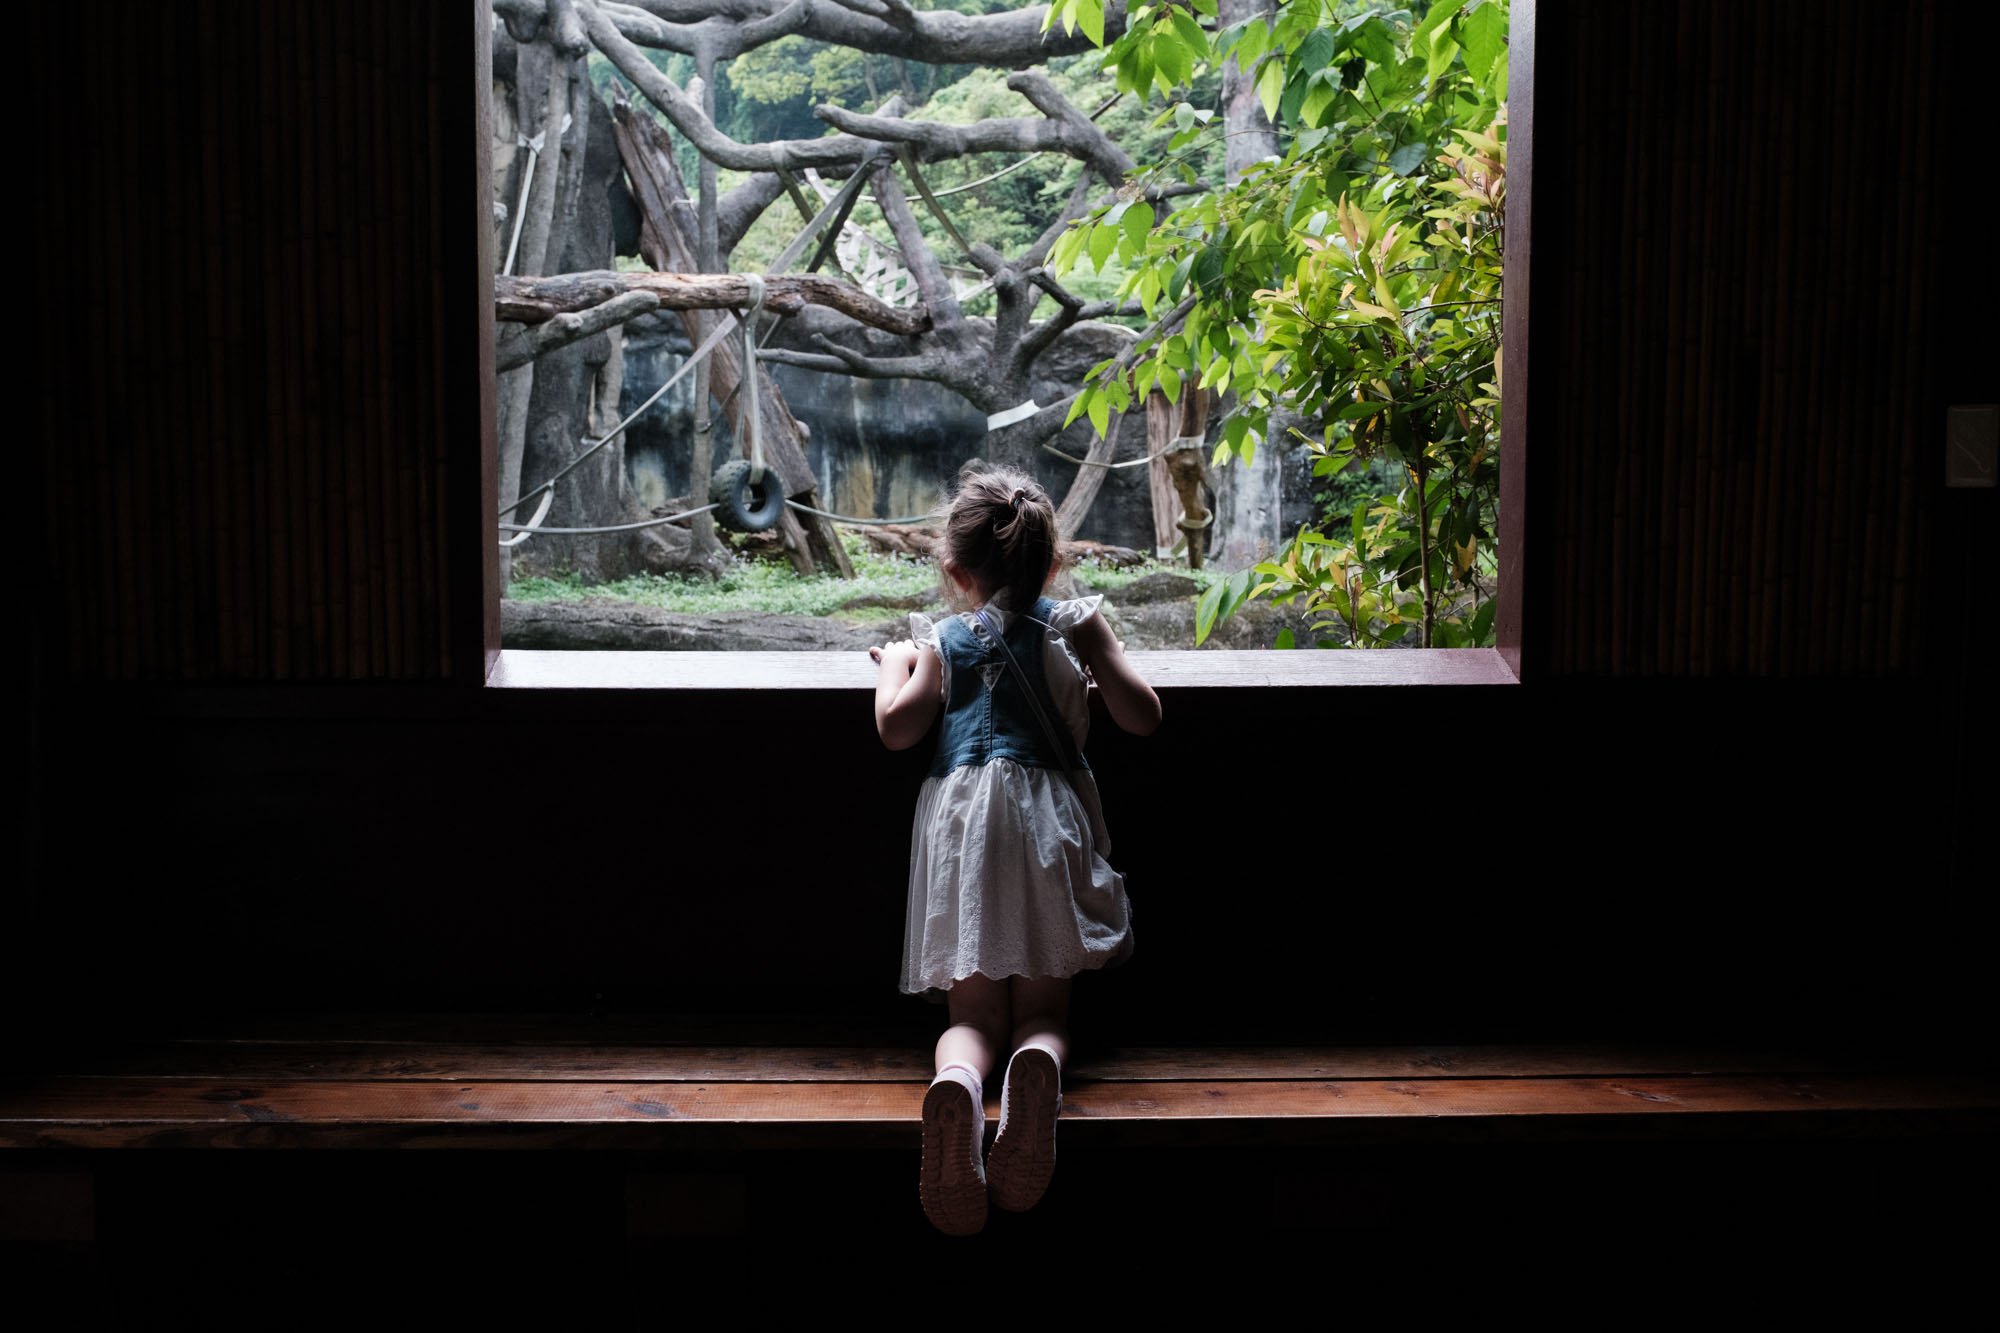 A little girl looks out at the ape enclosure at the Taipei Zoo.